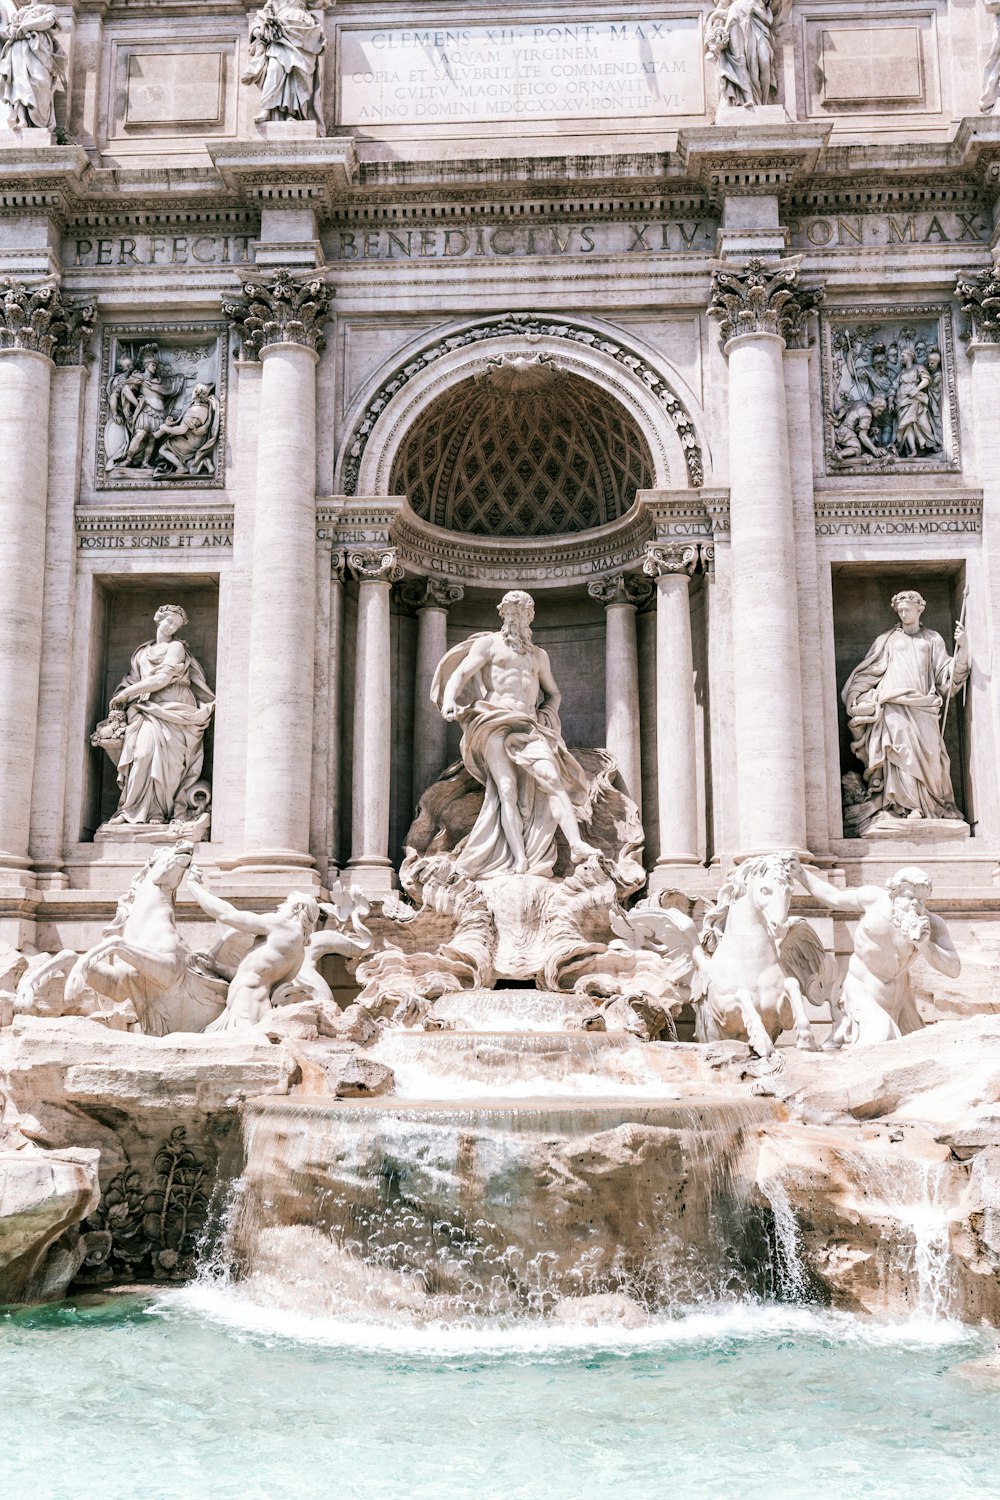 a fountain with statues and a clock on the side of it